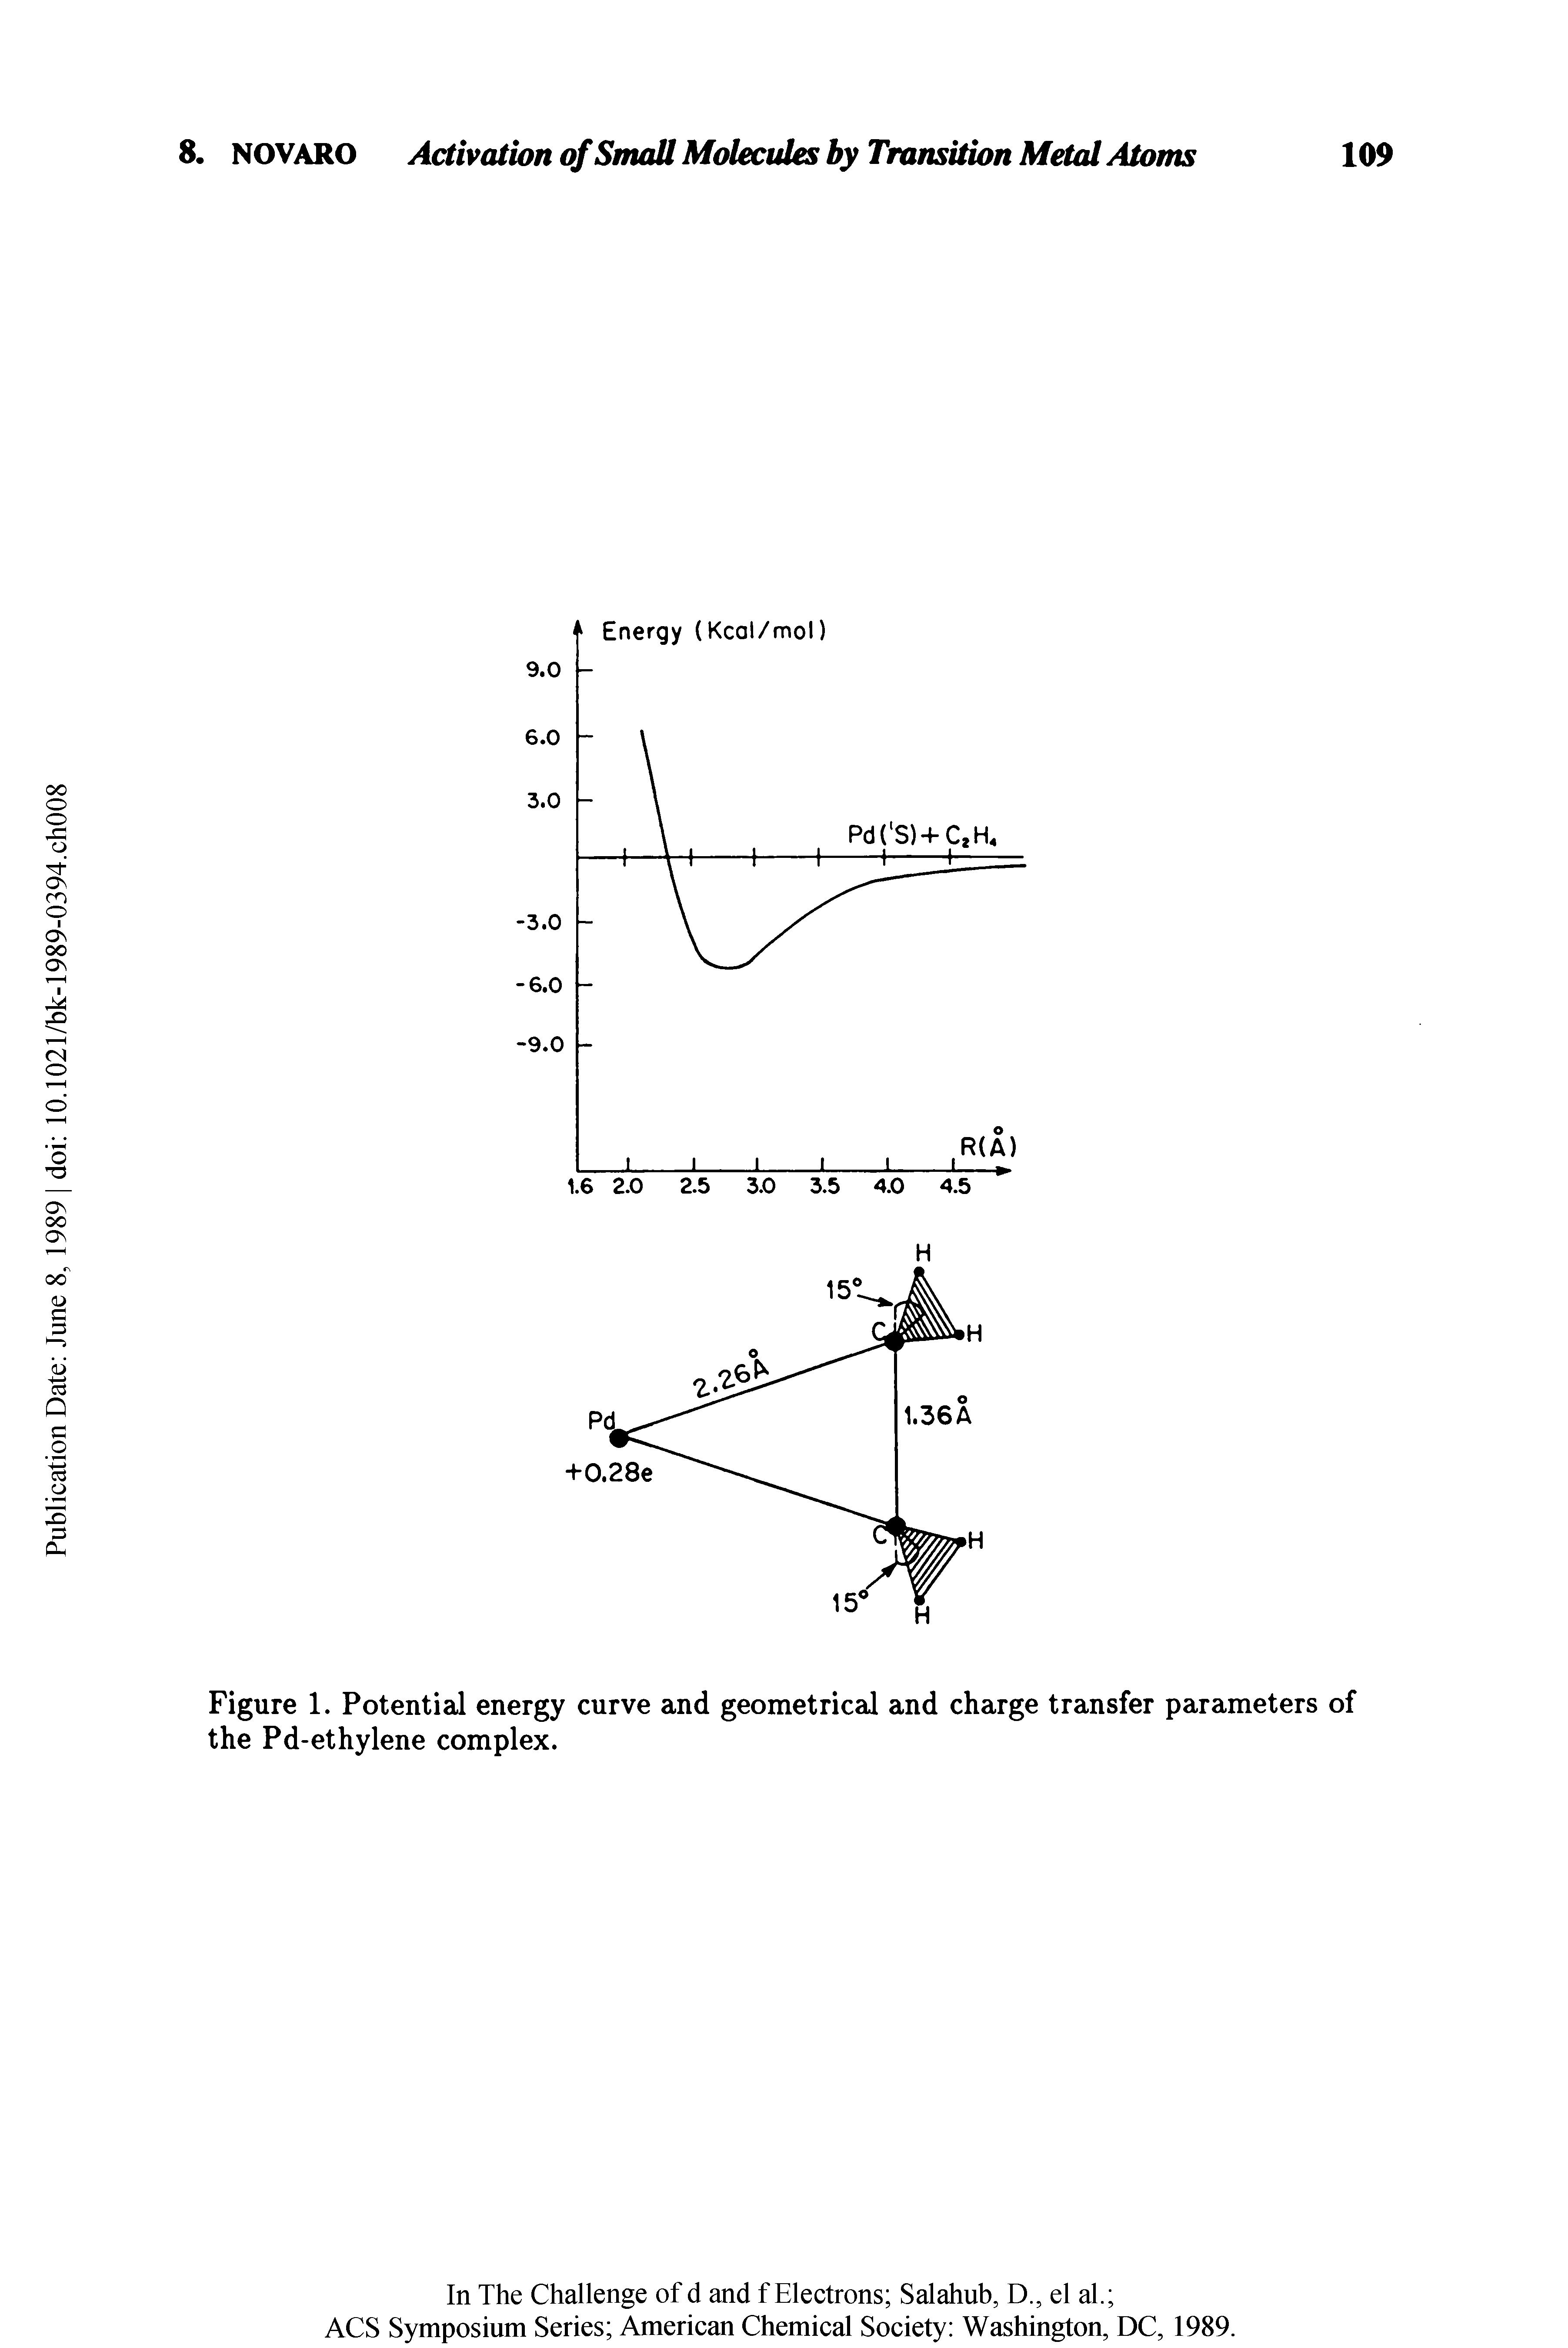 Figure 1. Potential energy curve and geometrical and charge transfer parameters of the Pd-ethylene complex.